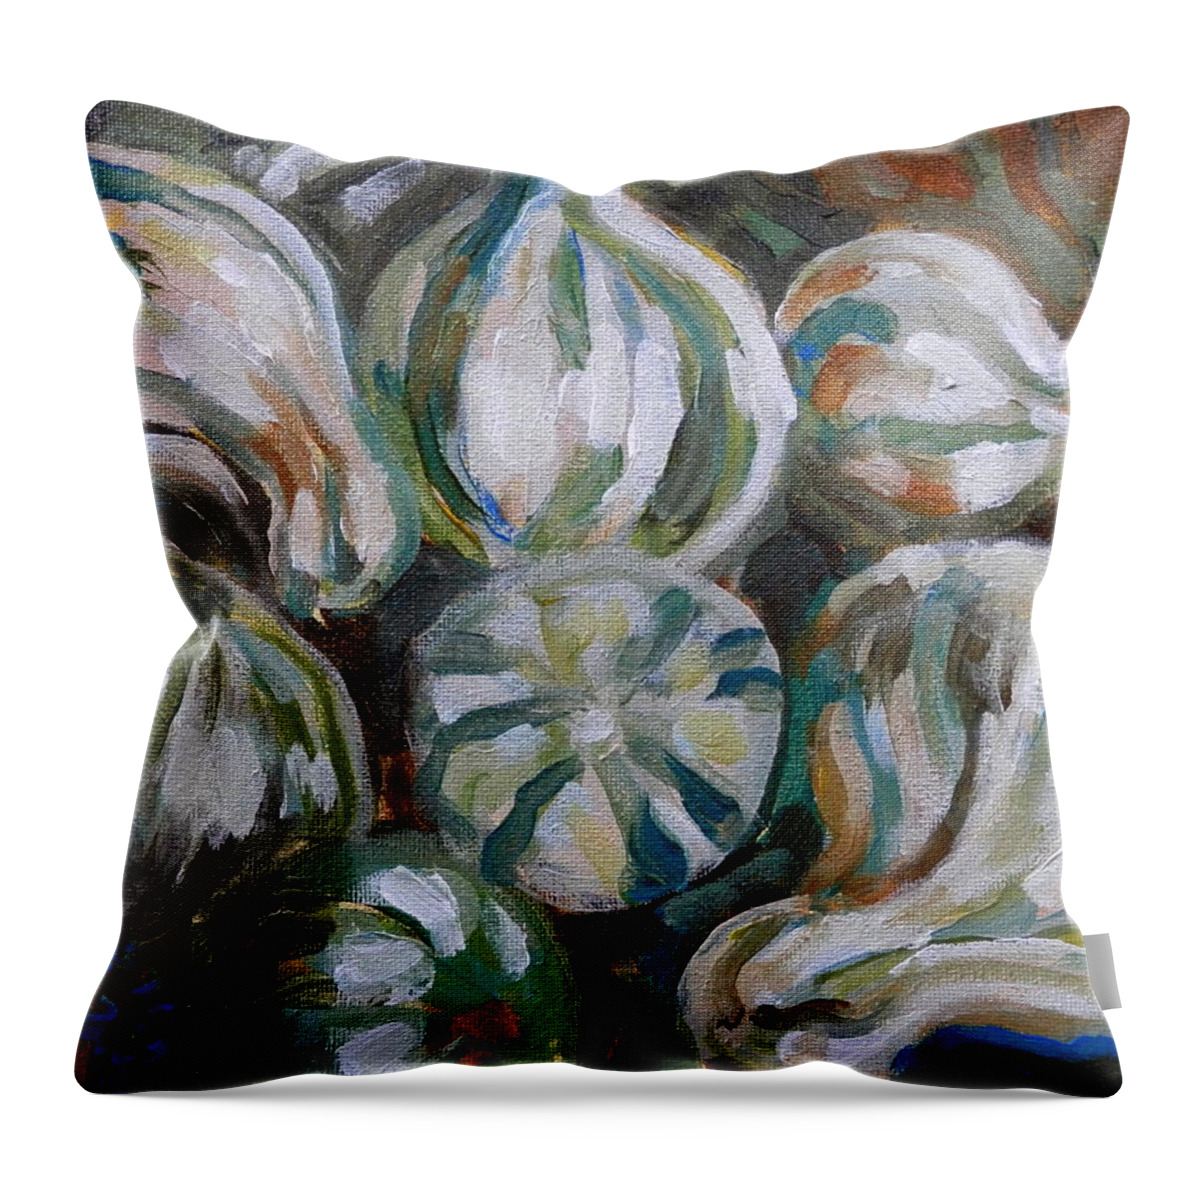 Stripped Pumpkins Throw Pillow featuring the painting Cushaw Pumpkins by Martha Tisdale